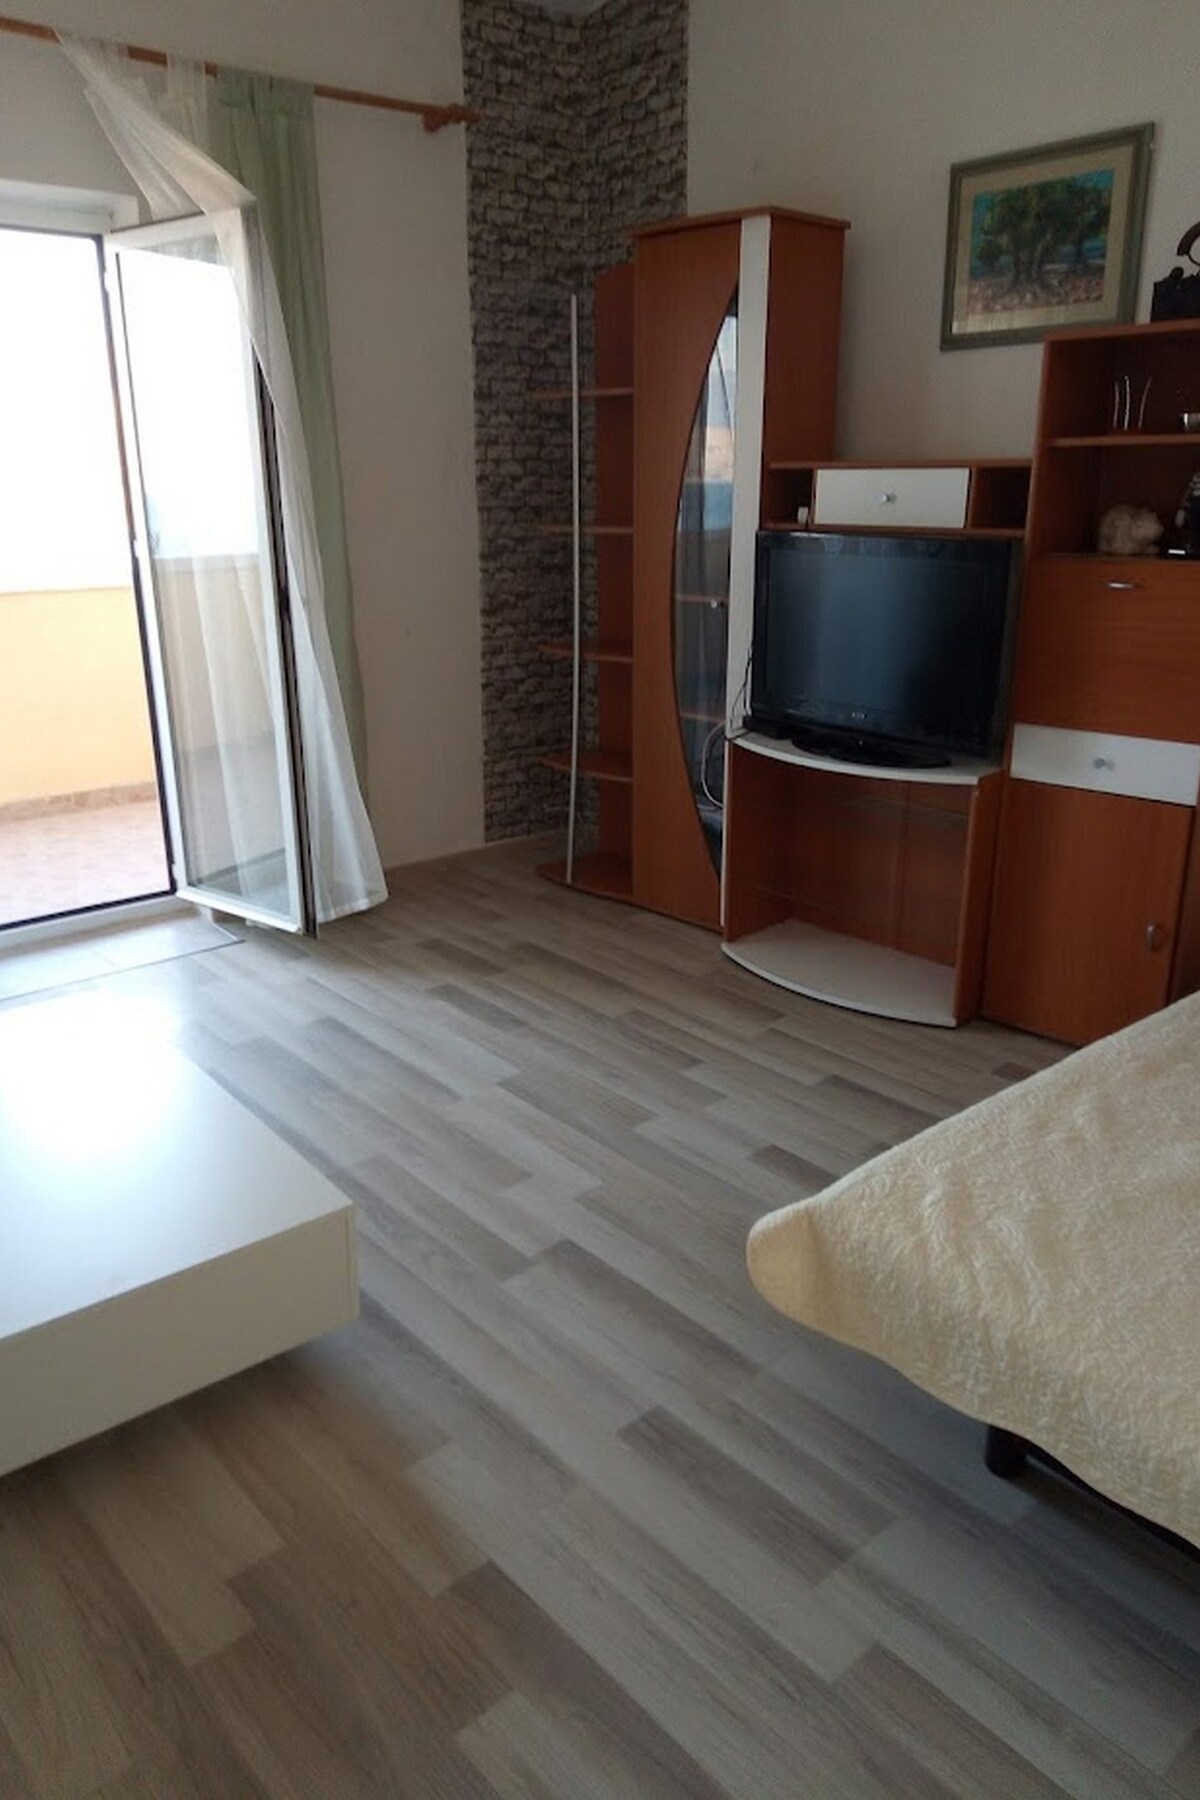 A-20577-b One bedroom apartment with balcony and